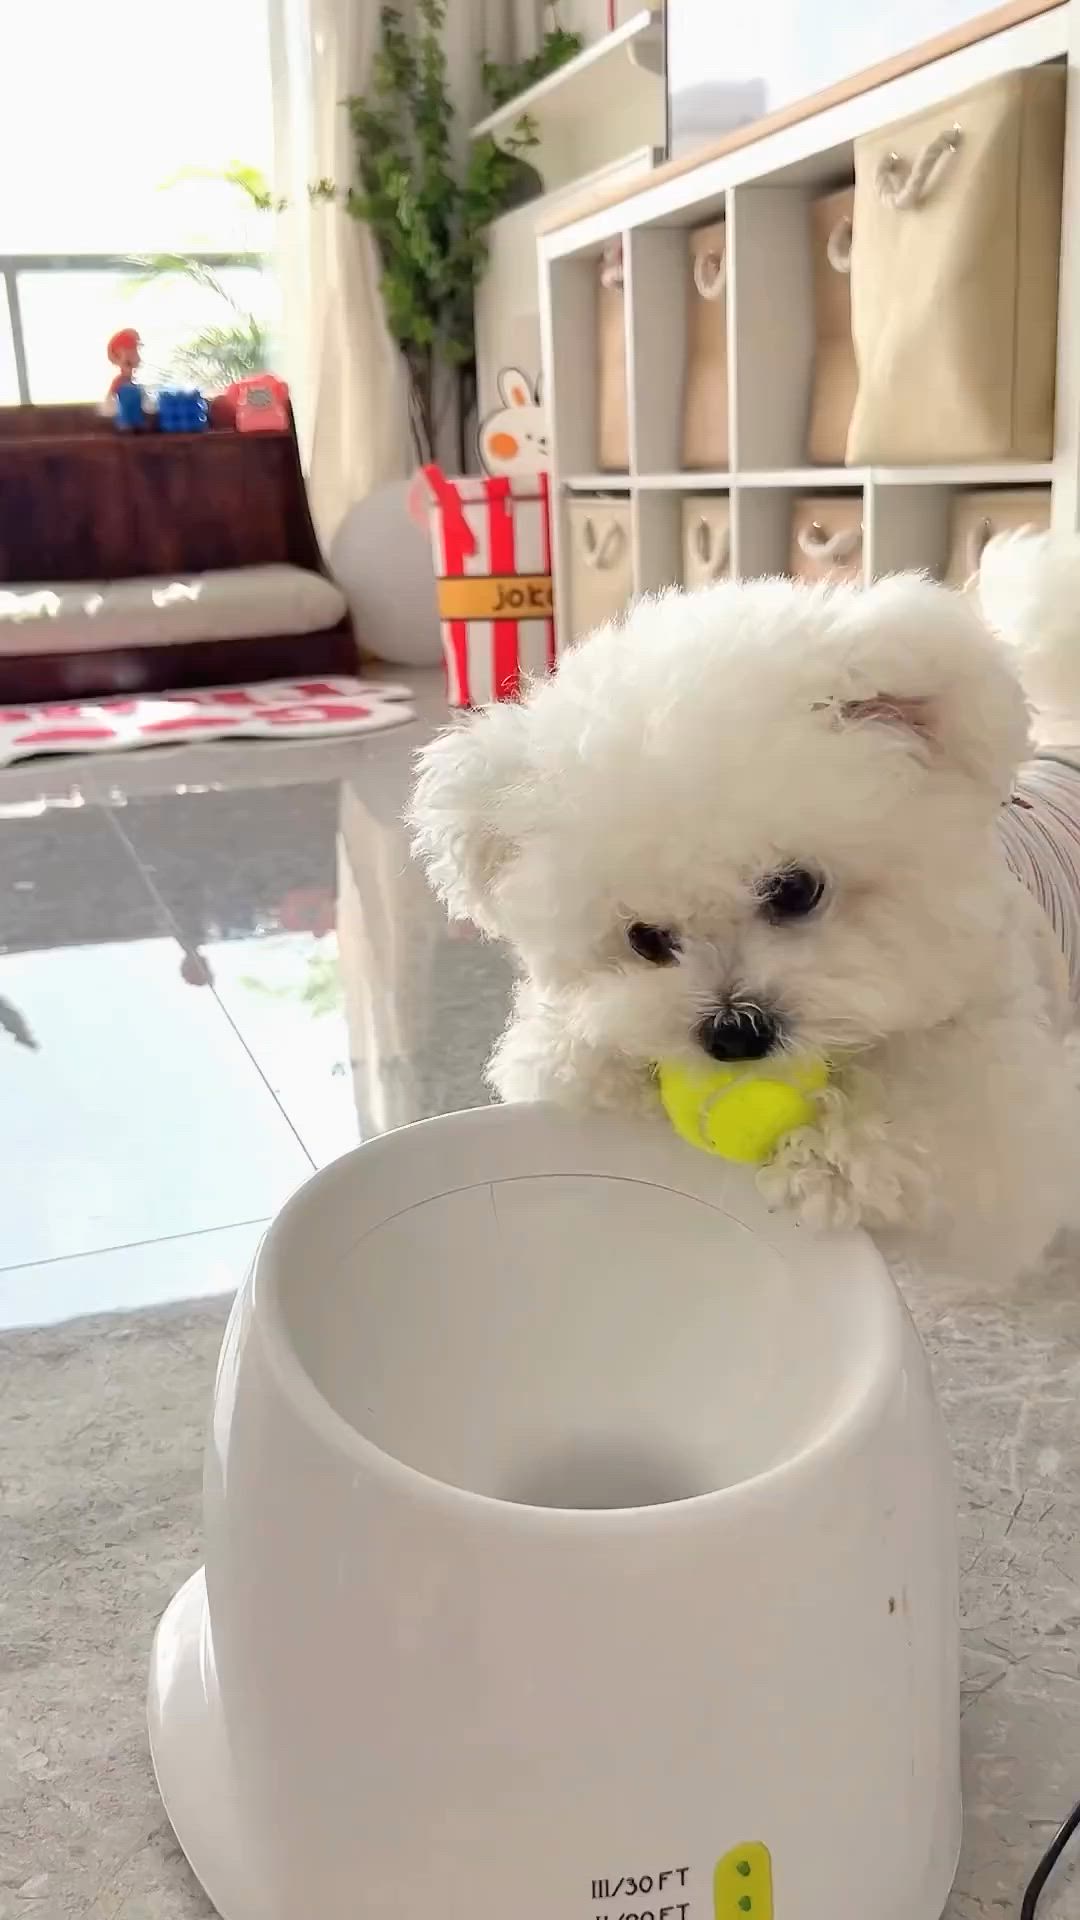 This may contain: a small white dog holding a tennis ball in its mouth while standing next to a bowl